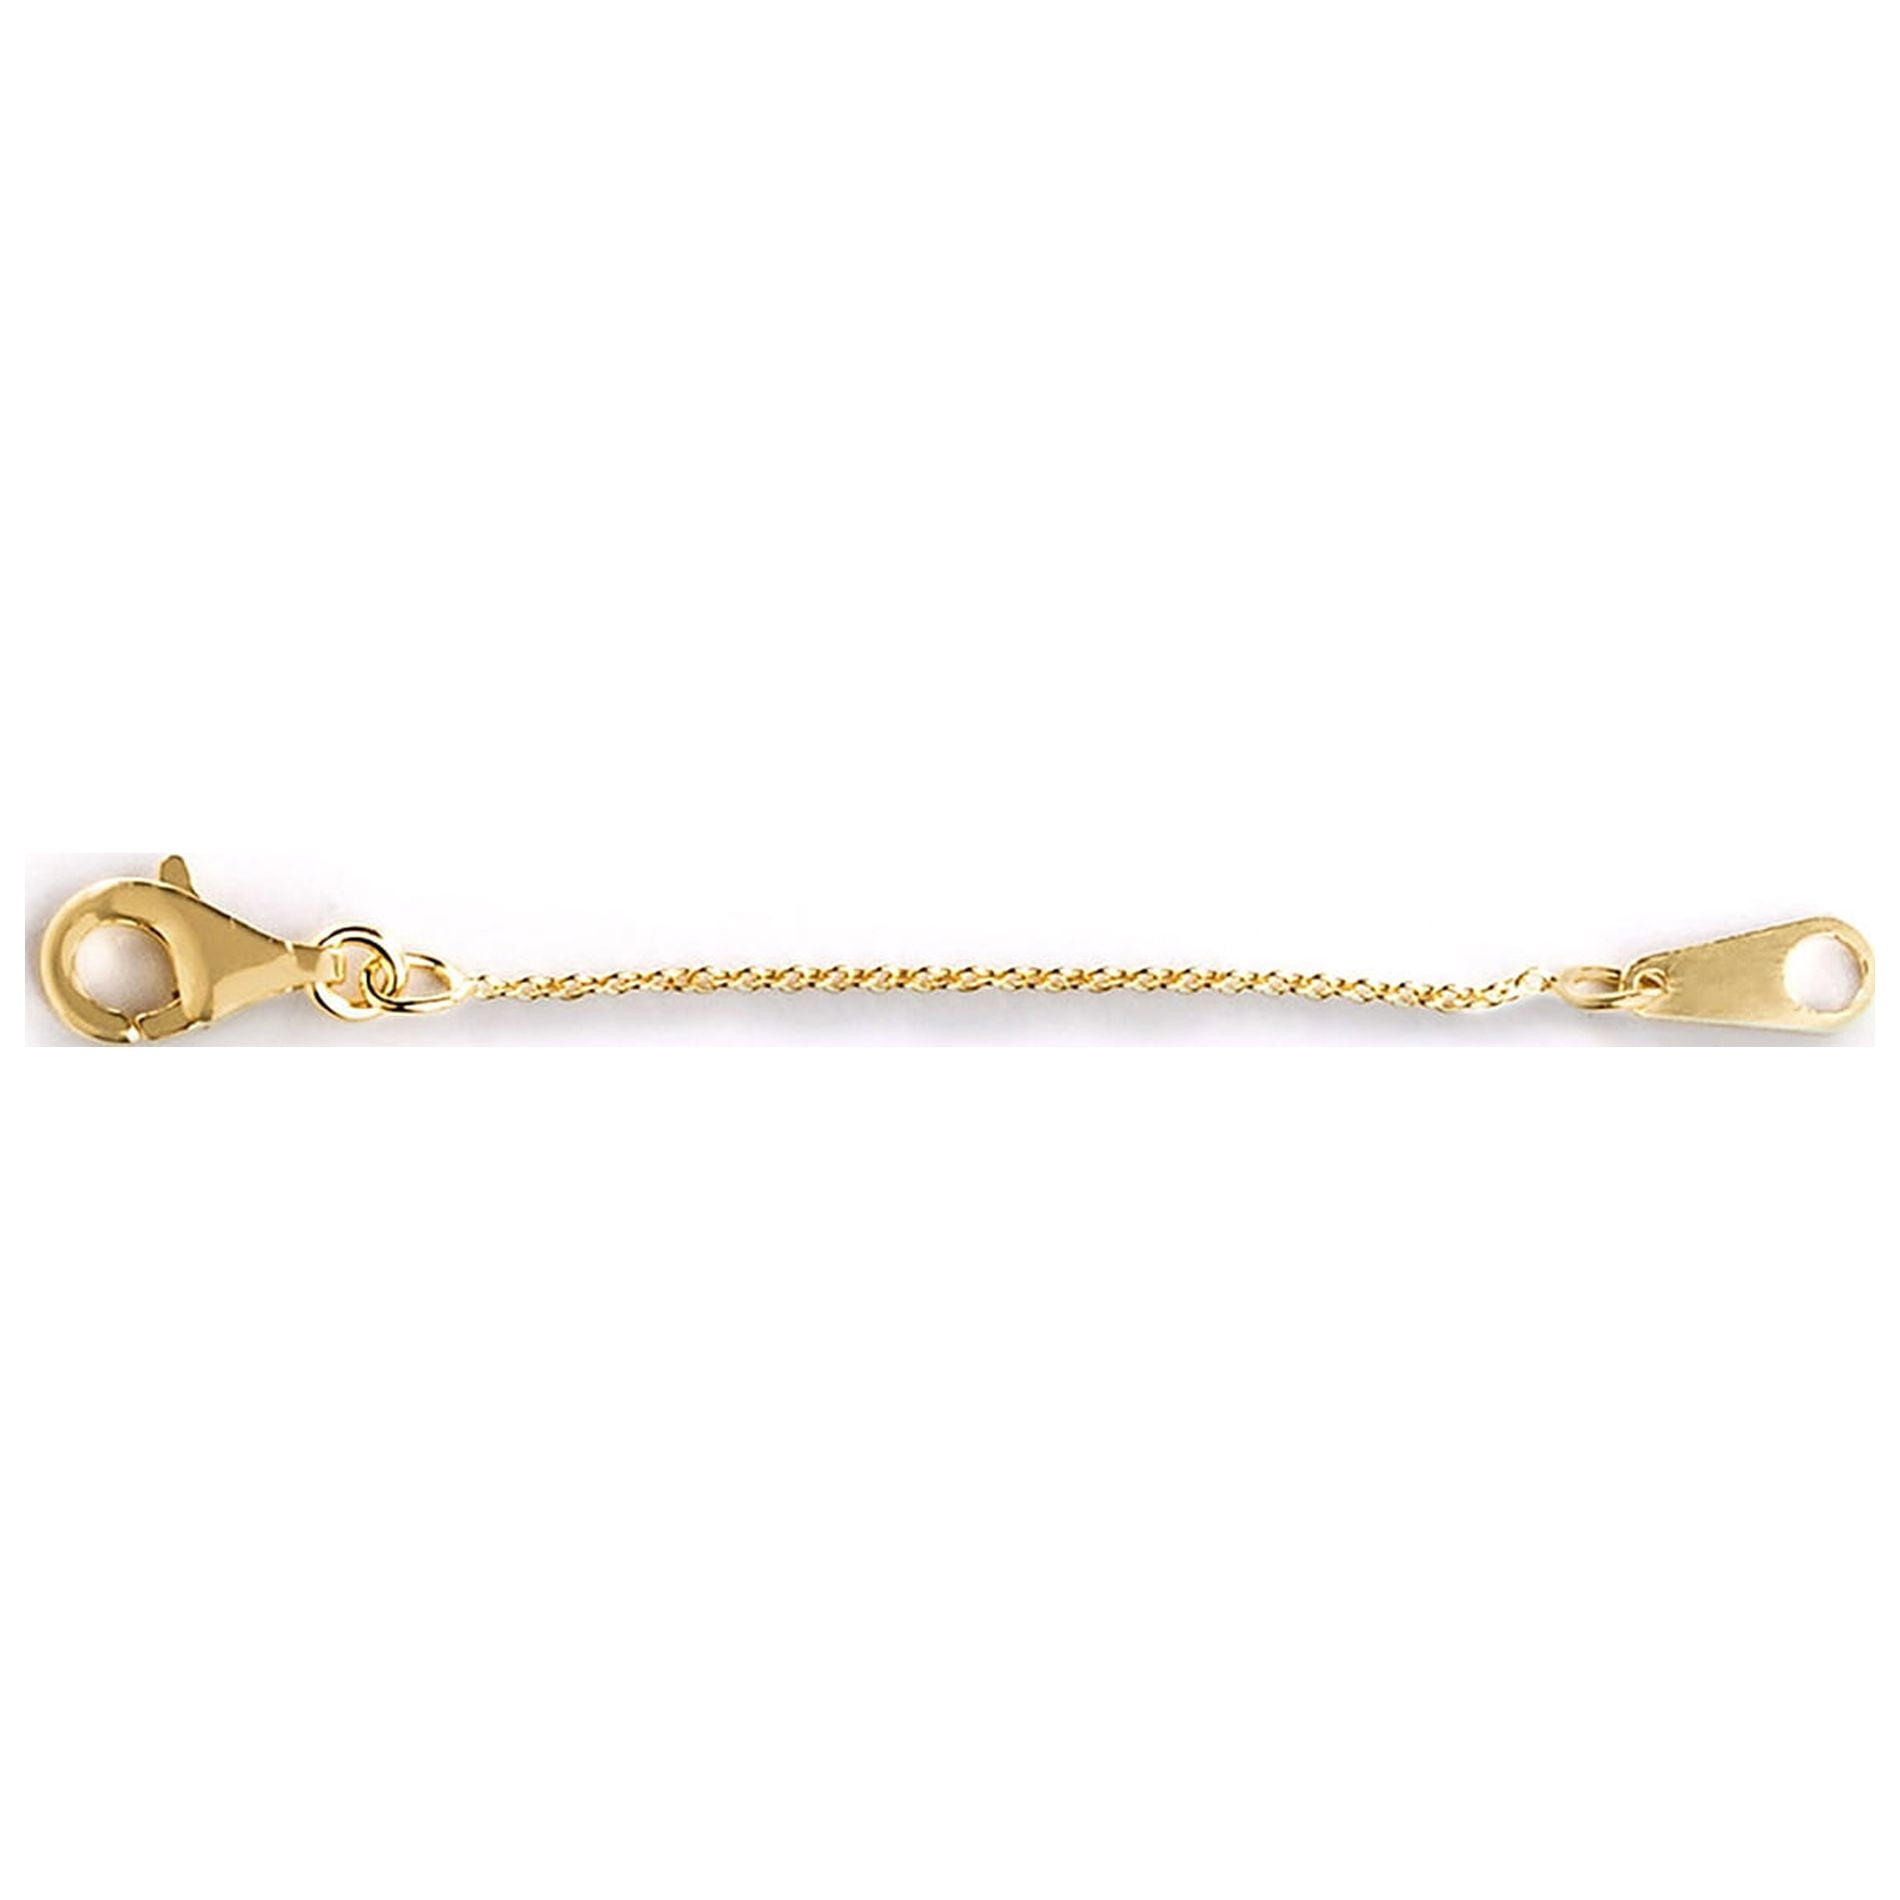  14k 18k Solid Gold Extender For Necklace or Bracelet, Removable  Real Solid Gold Extension Link Cable Chain, Adjustable Length For 1inch  2inch 3icnh 4 inch. Jewee Diamond : Handmade Products